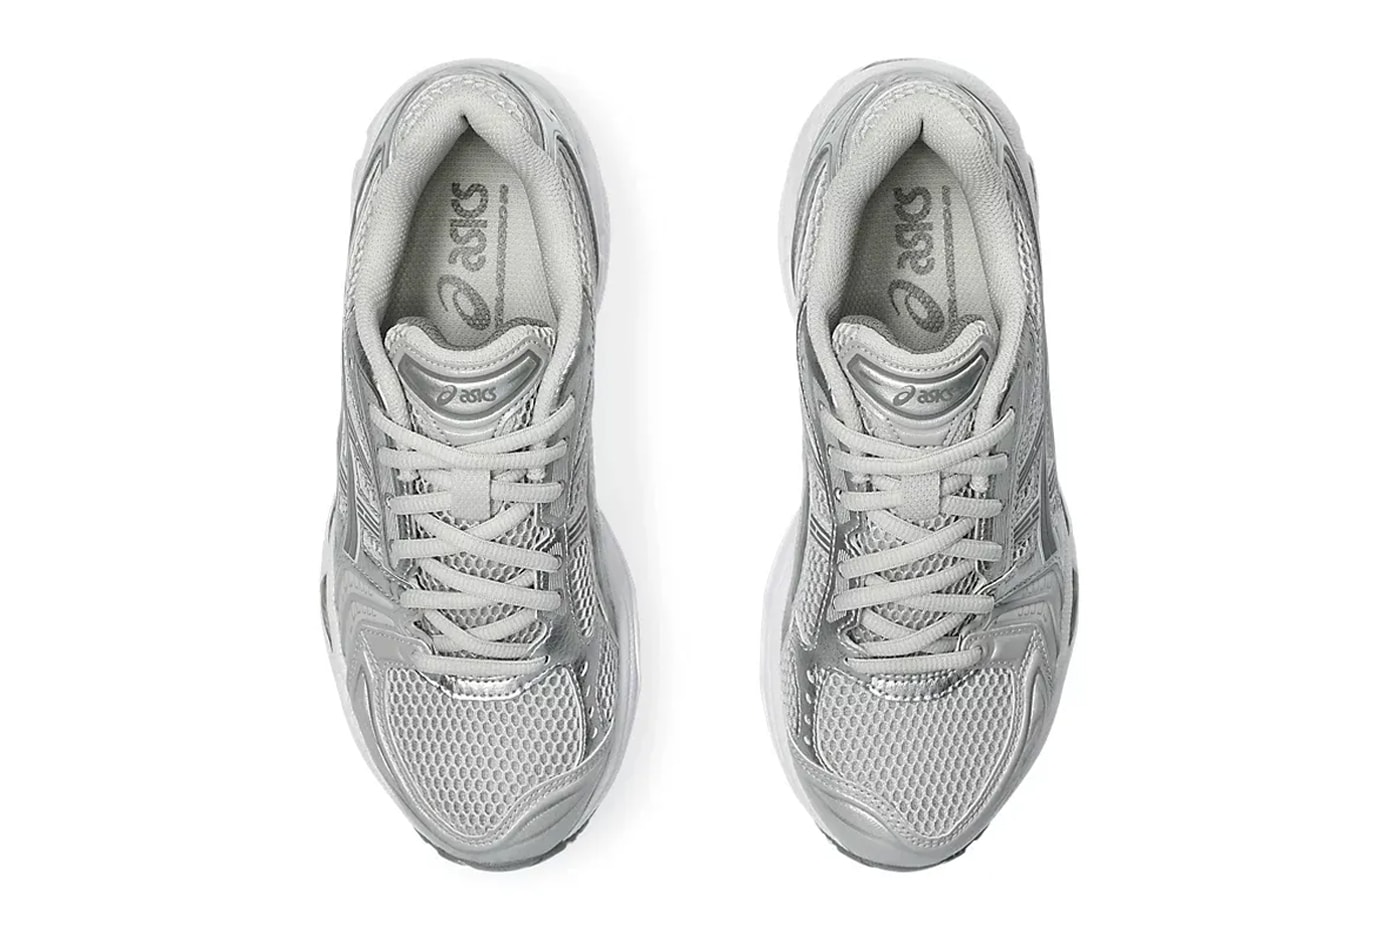 ASICS GEL-KAYANO 14 "Cloud Grey" 1202A056-021 Release info all grey hue color scheme comfort shoes sneakers dad shoes